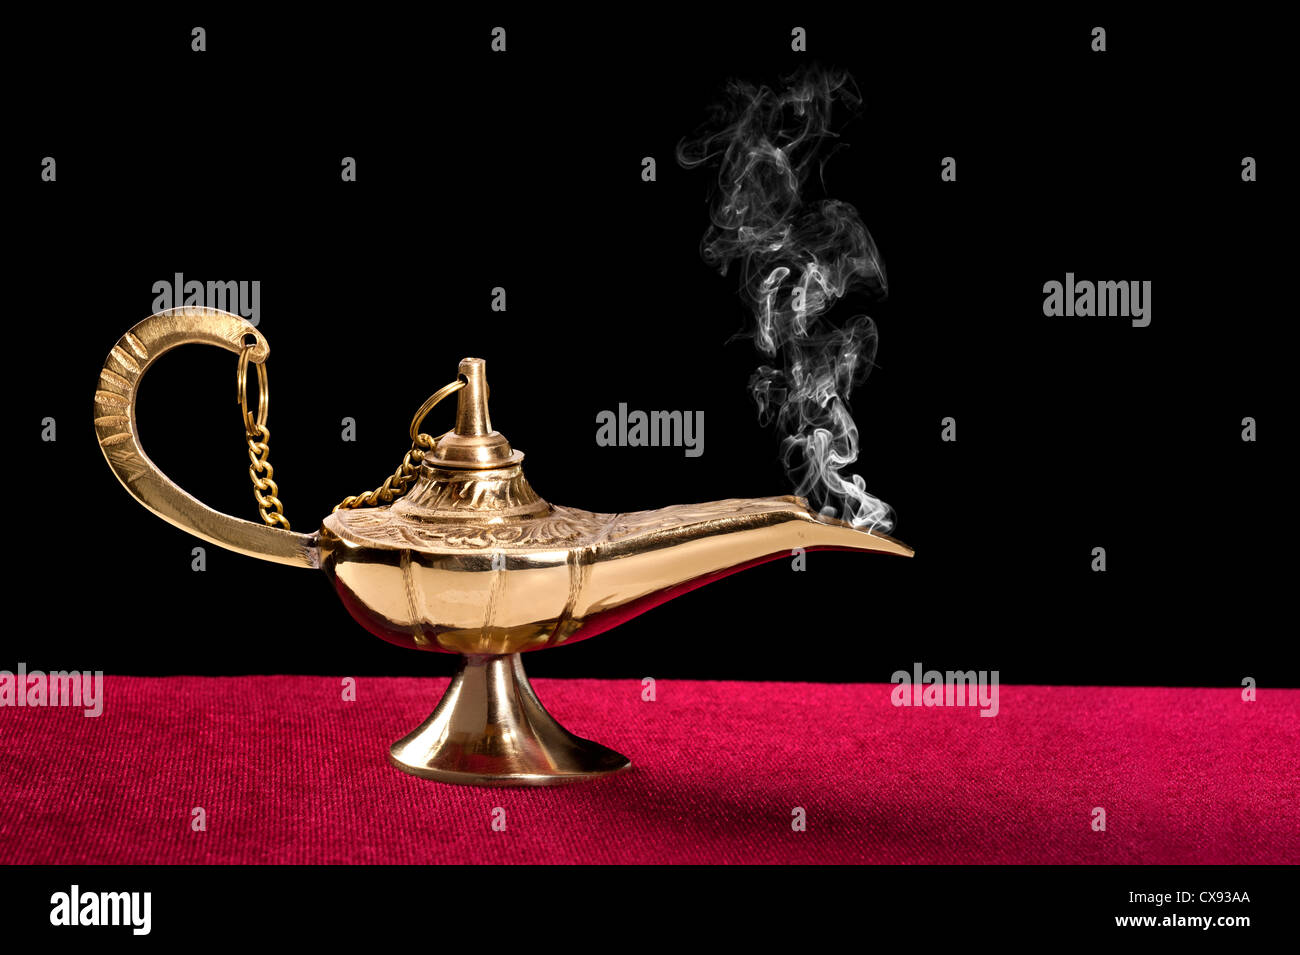 An ancient magic lamp on a red felt table top disperses a stream of mysterious smoke. Stock Photo